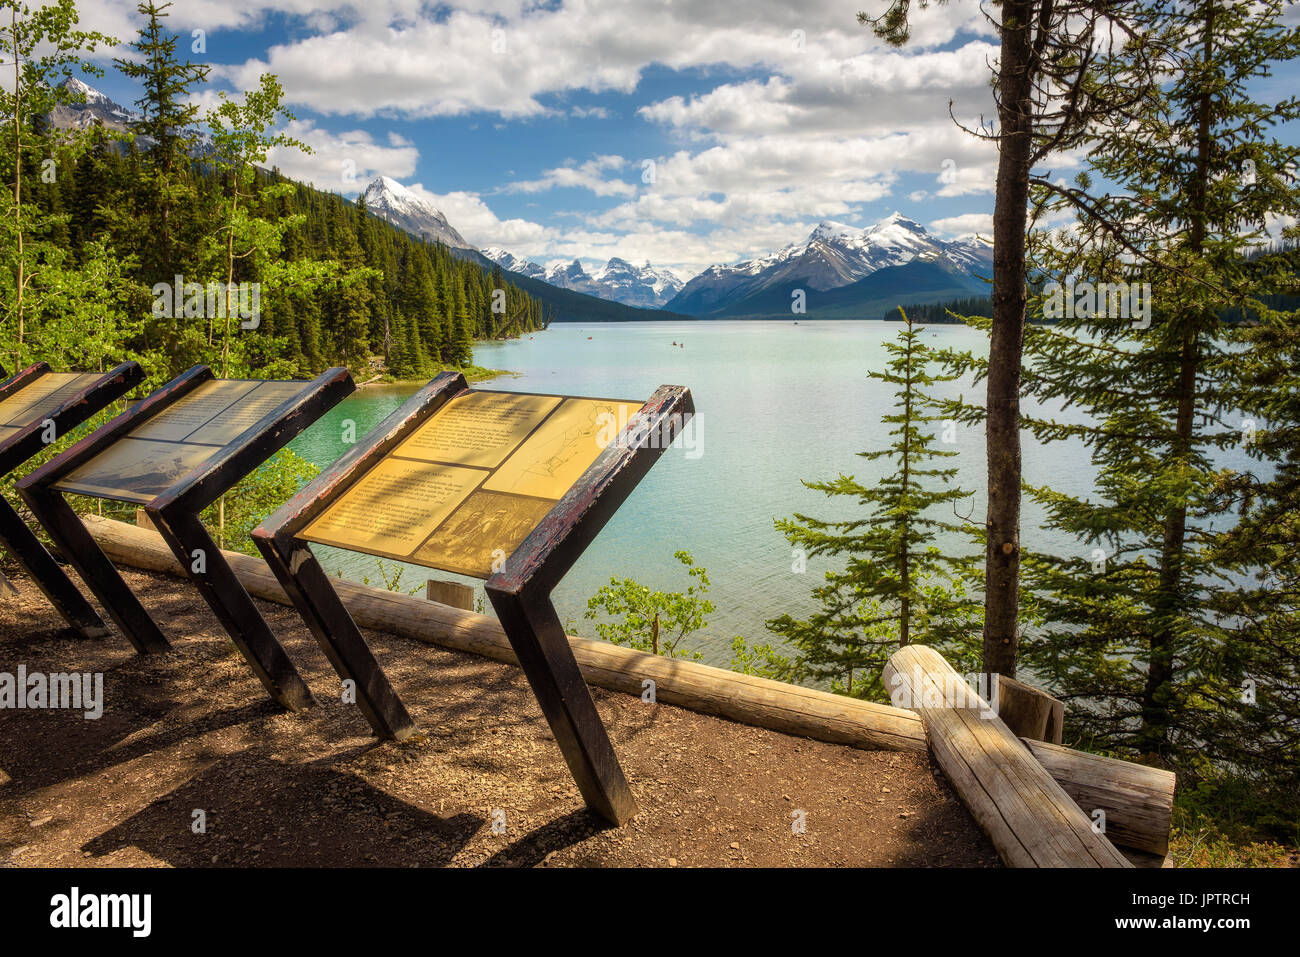 Tourist viewpoint overlooking Maligne Lake in Jasper National Park, Canada. Stock Photo